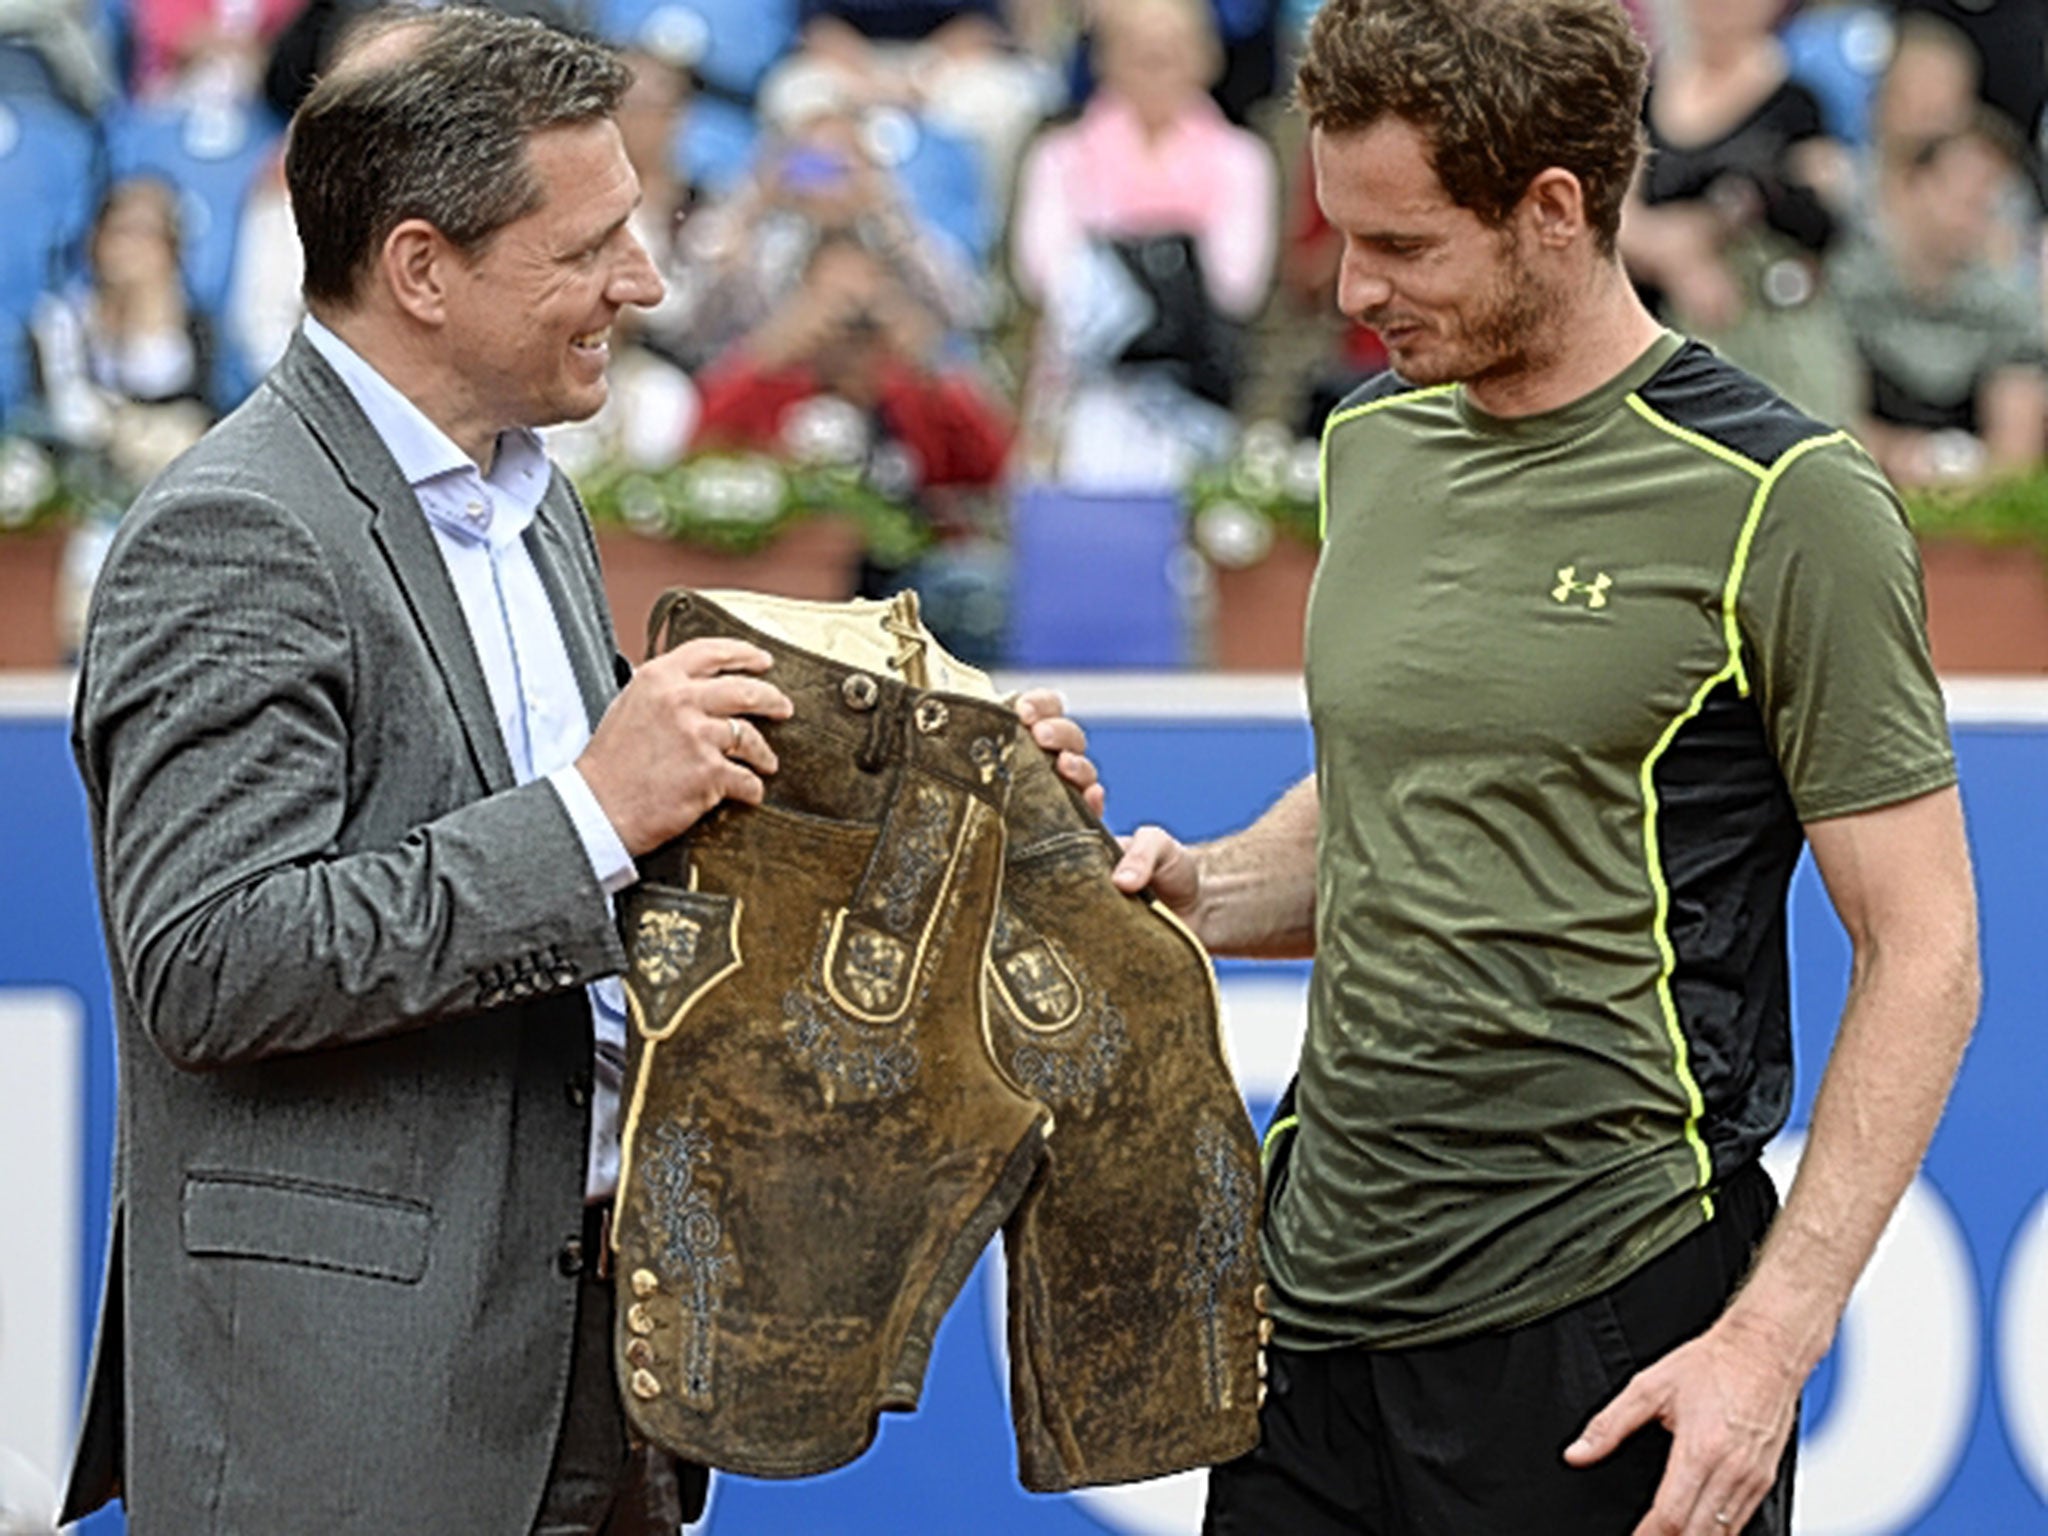 Andy Murray is presented with a pair of lederhosen after beating Philipp Kohlschreiber